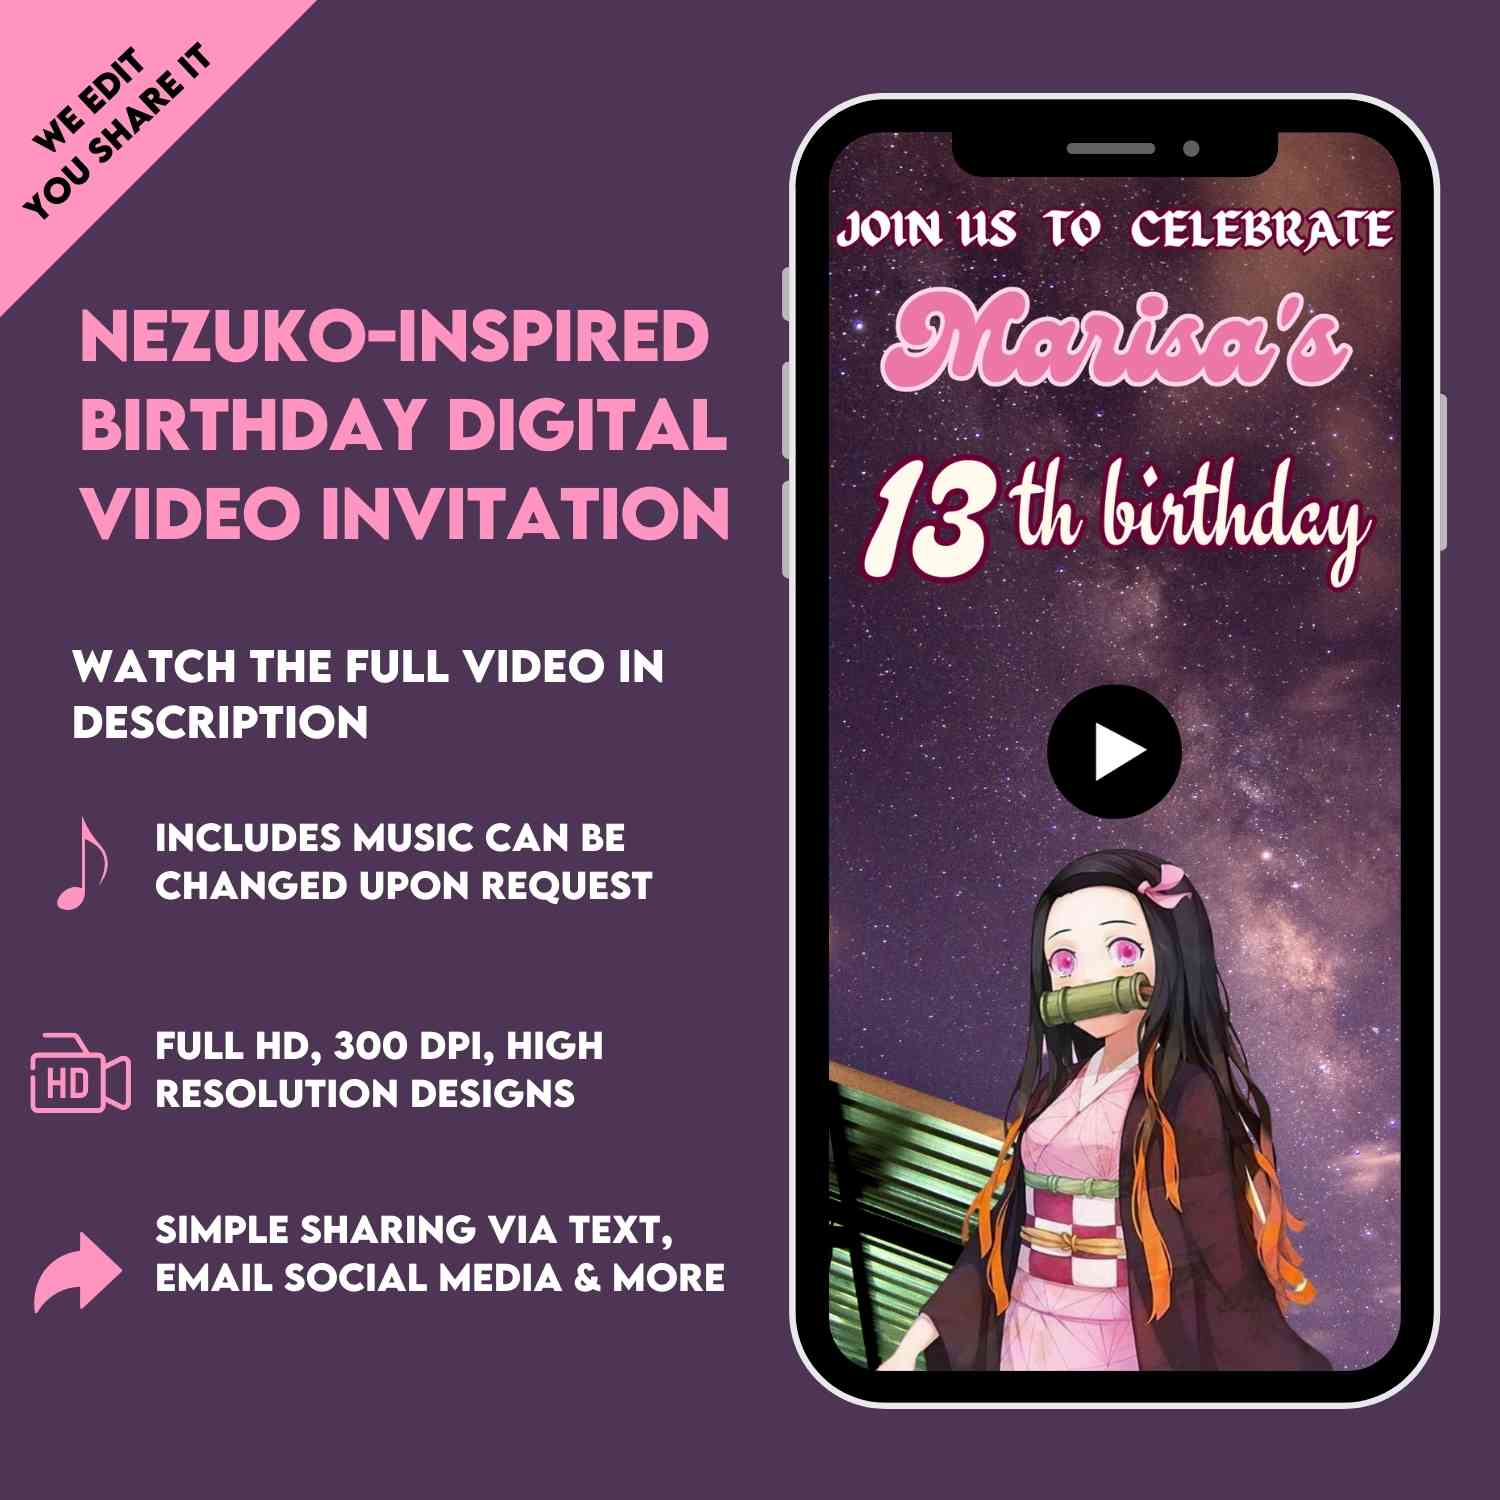 9+ Epic My Hero Academia Birthday Invitation Templates For Anime Lovers |  Download Hundreds FREE PRINTABLE Birthday Invitation Templates